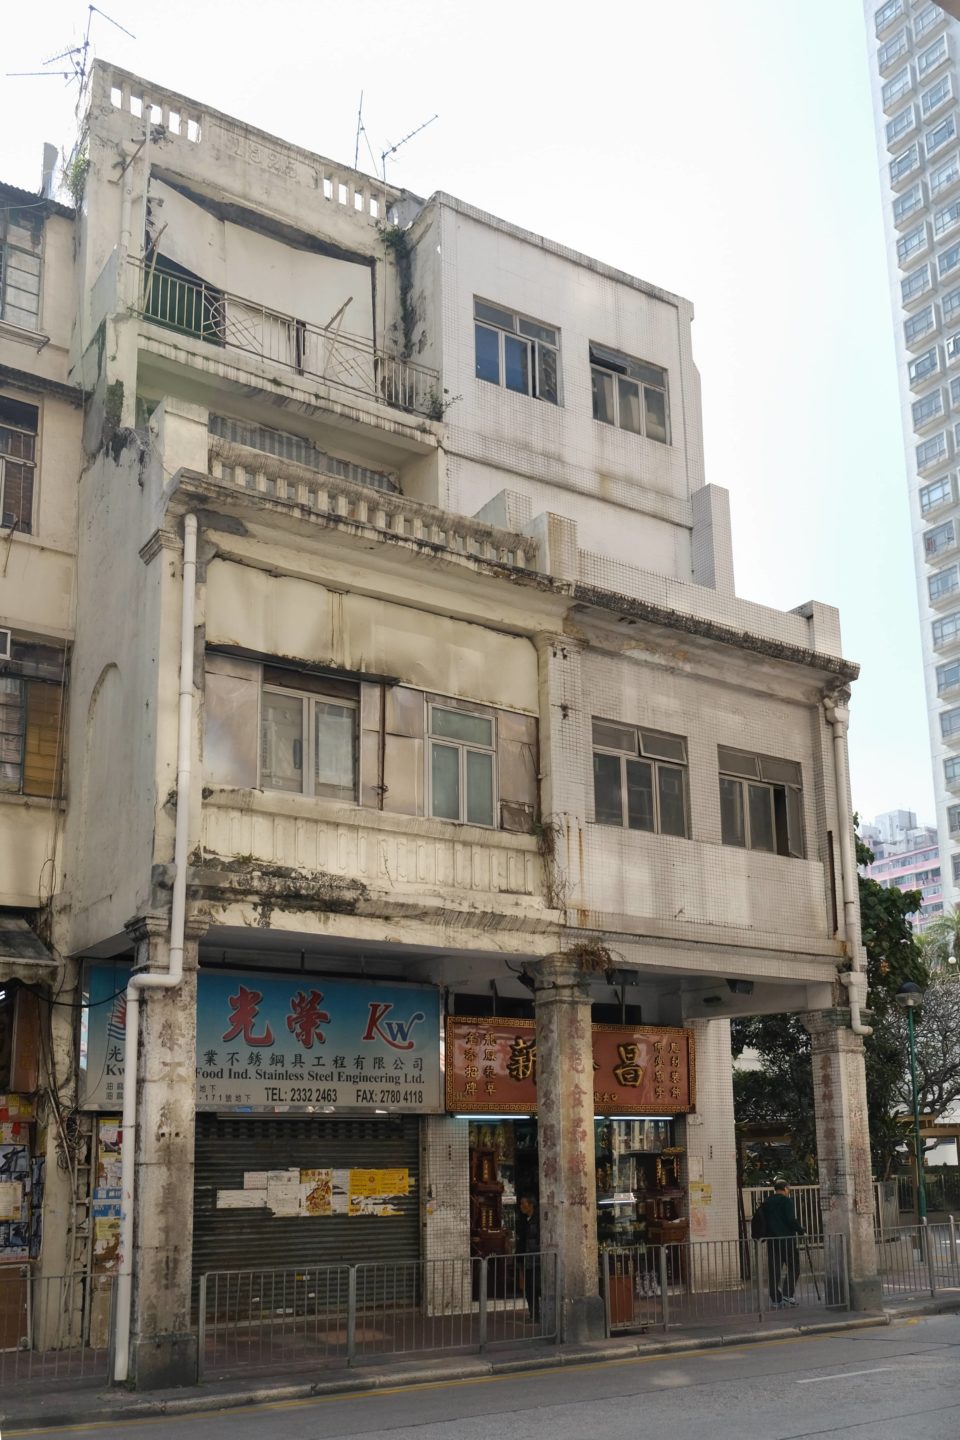 The “Disappearing” Buildings in Hong Kong (VI) — 92-year-old Chinese Tenement Stays Sturdy After Truck Crash